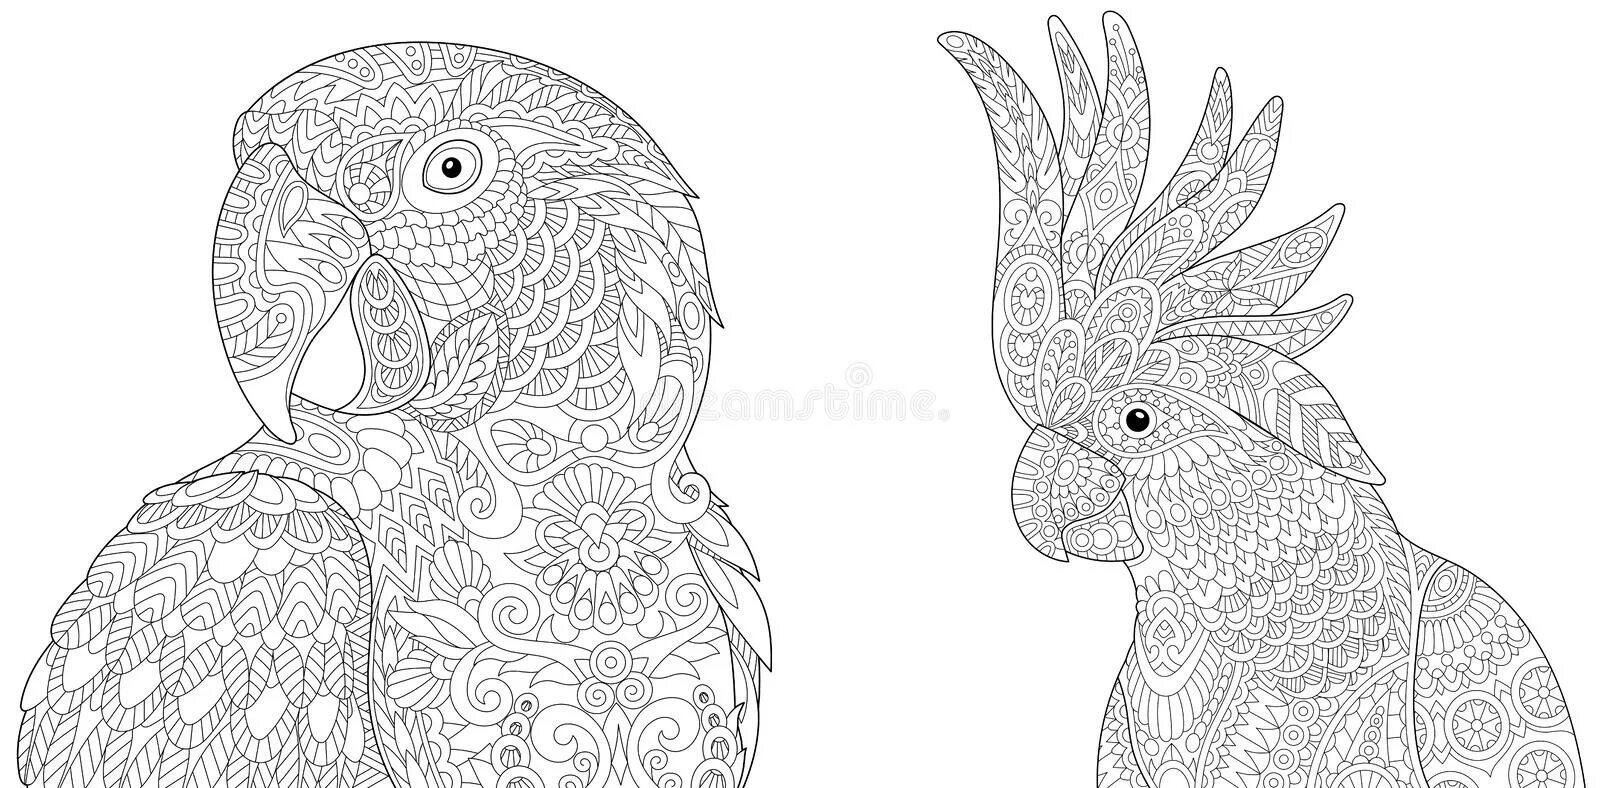 Luxury parrot coloring book